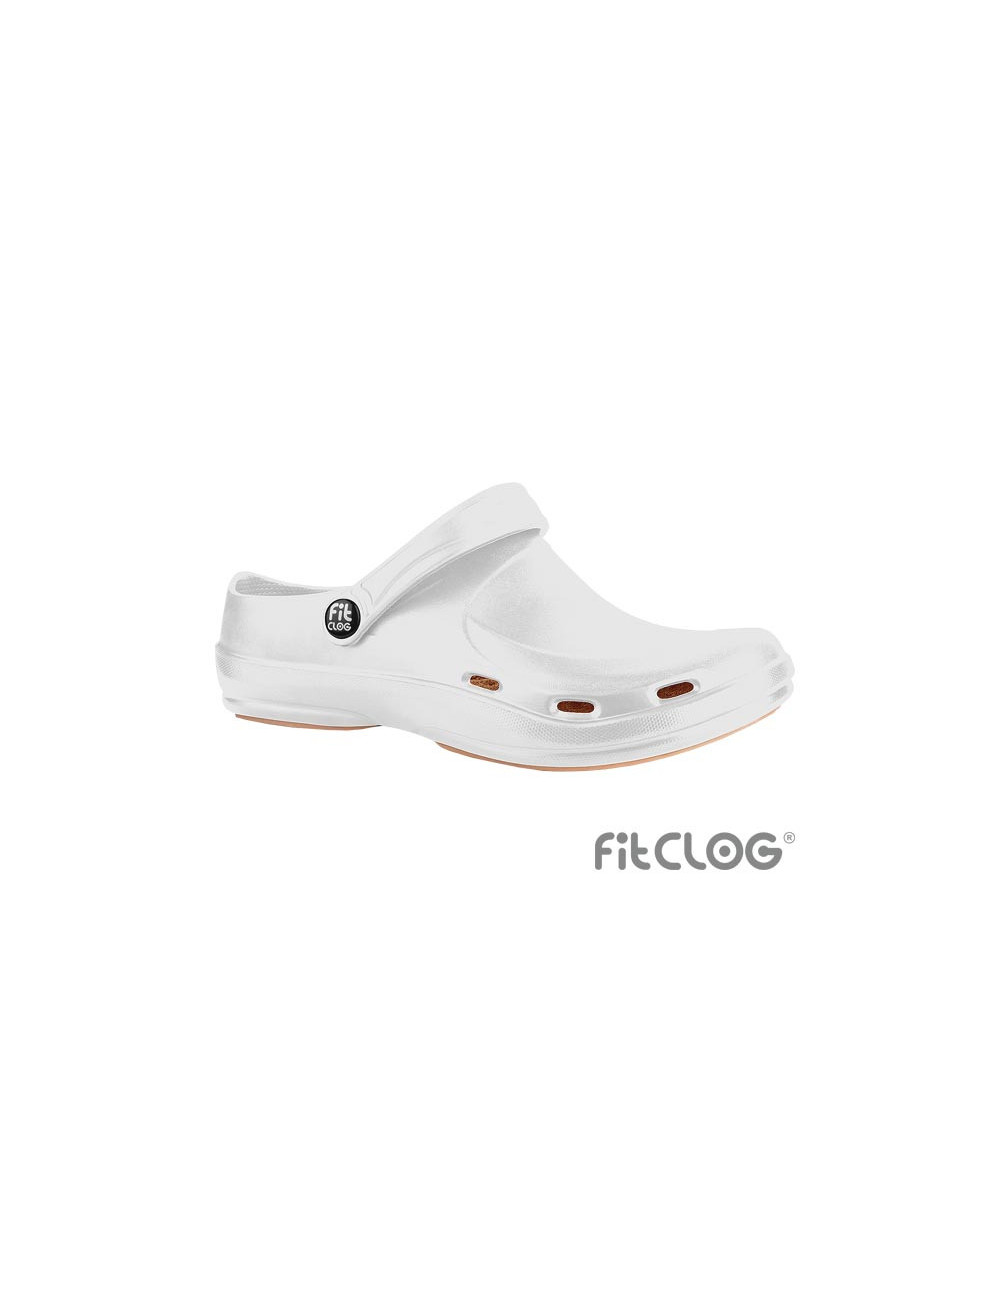 Slippers in white Fitclog Blfitclog